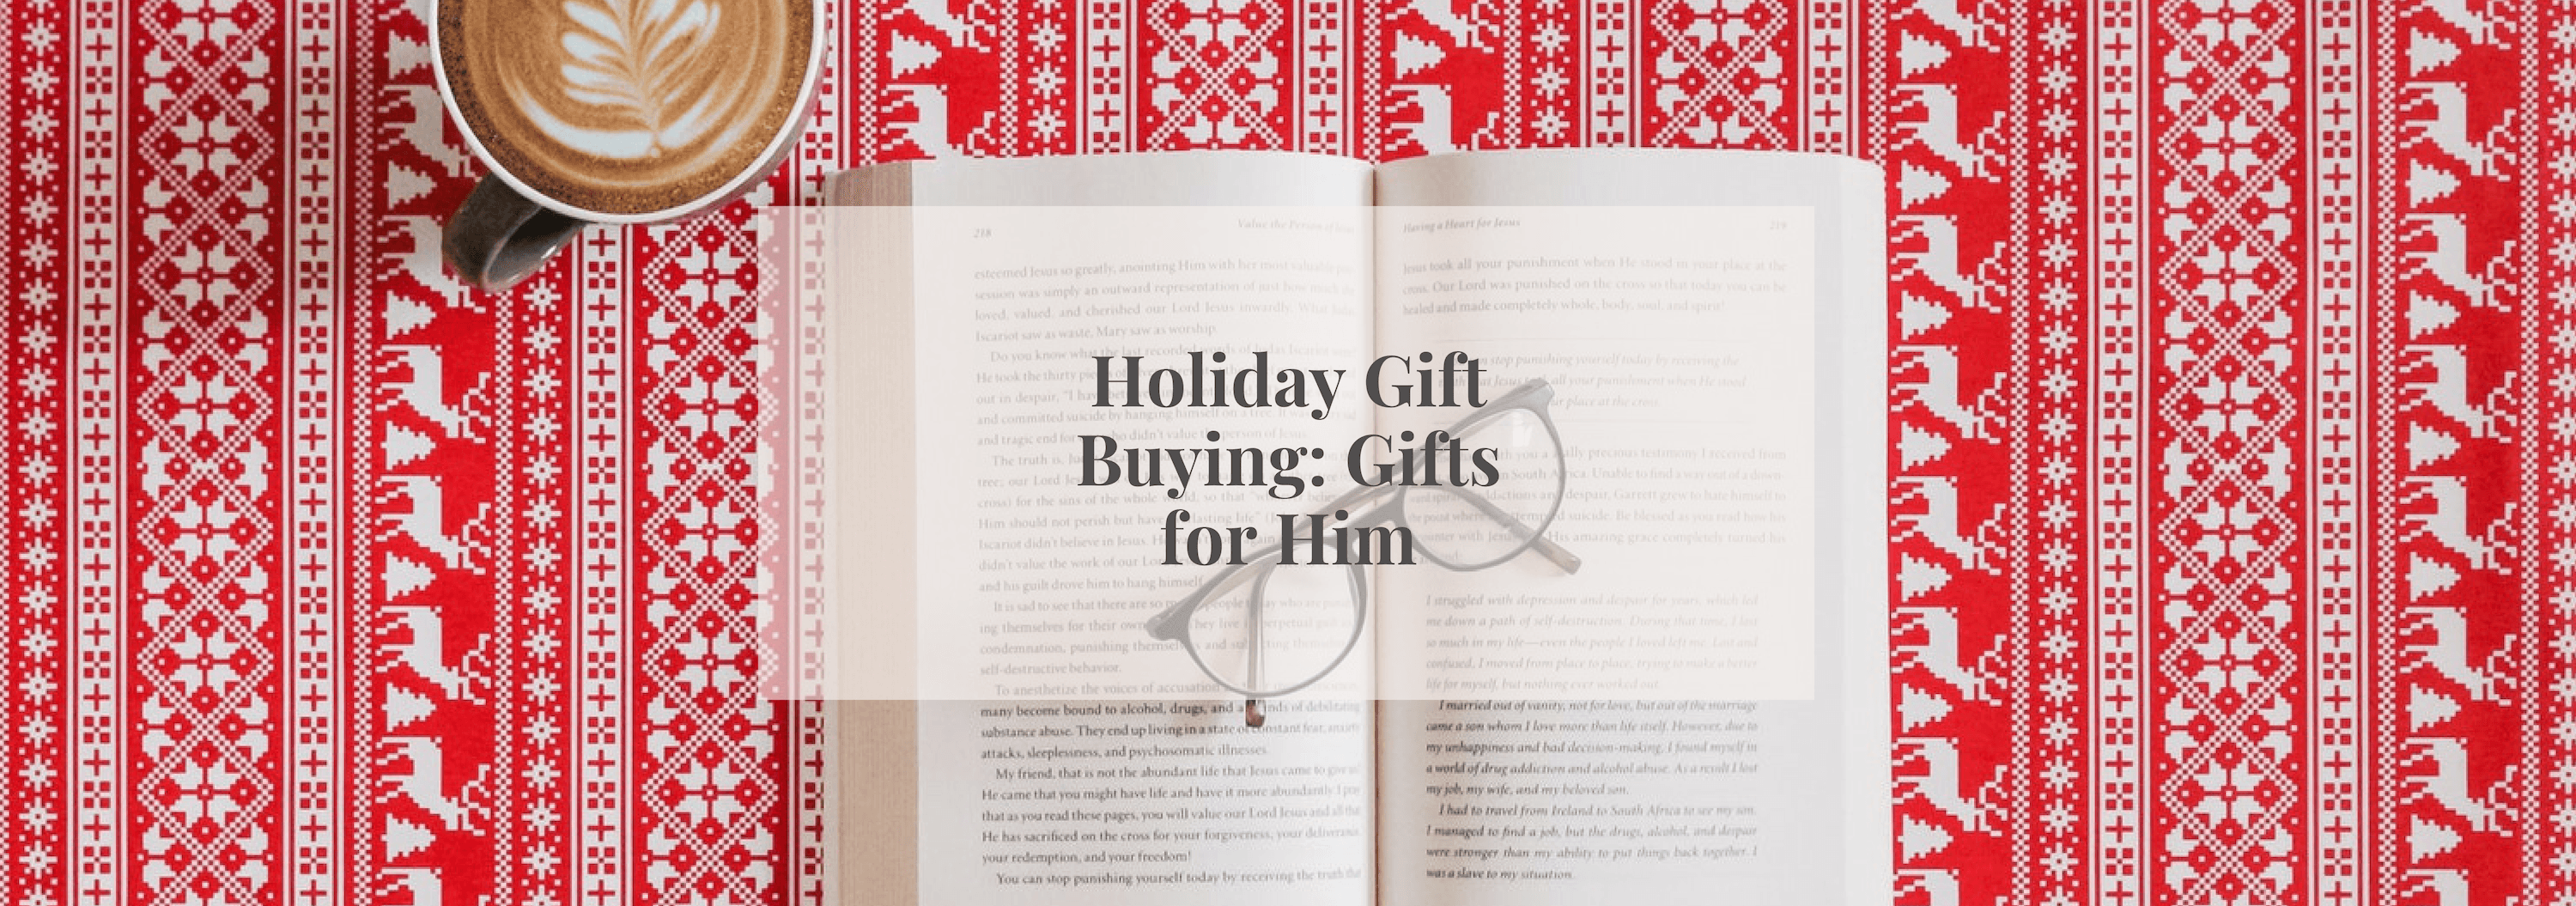 Holiday Gift Buying: Gifts for Him - Numi